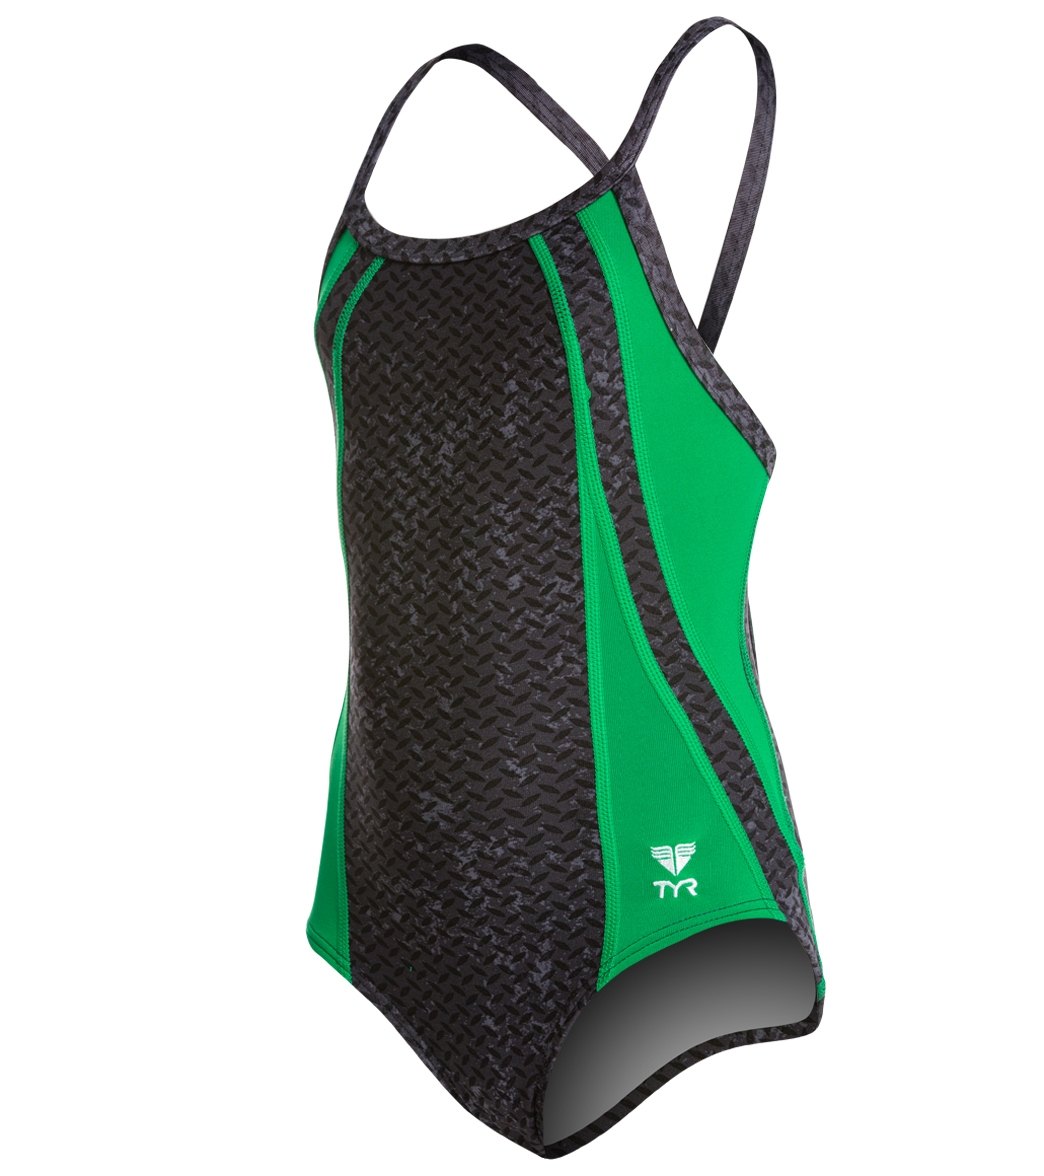 TYR Viper Youth Diamondfit One Piece Swimsuit at SwimOutlet.com - Free ...